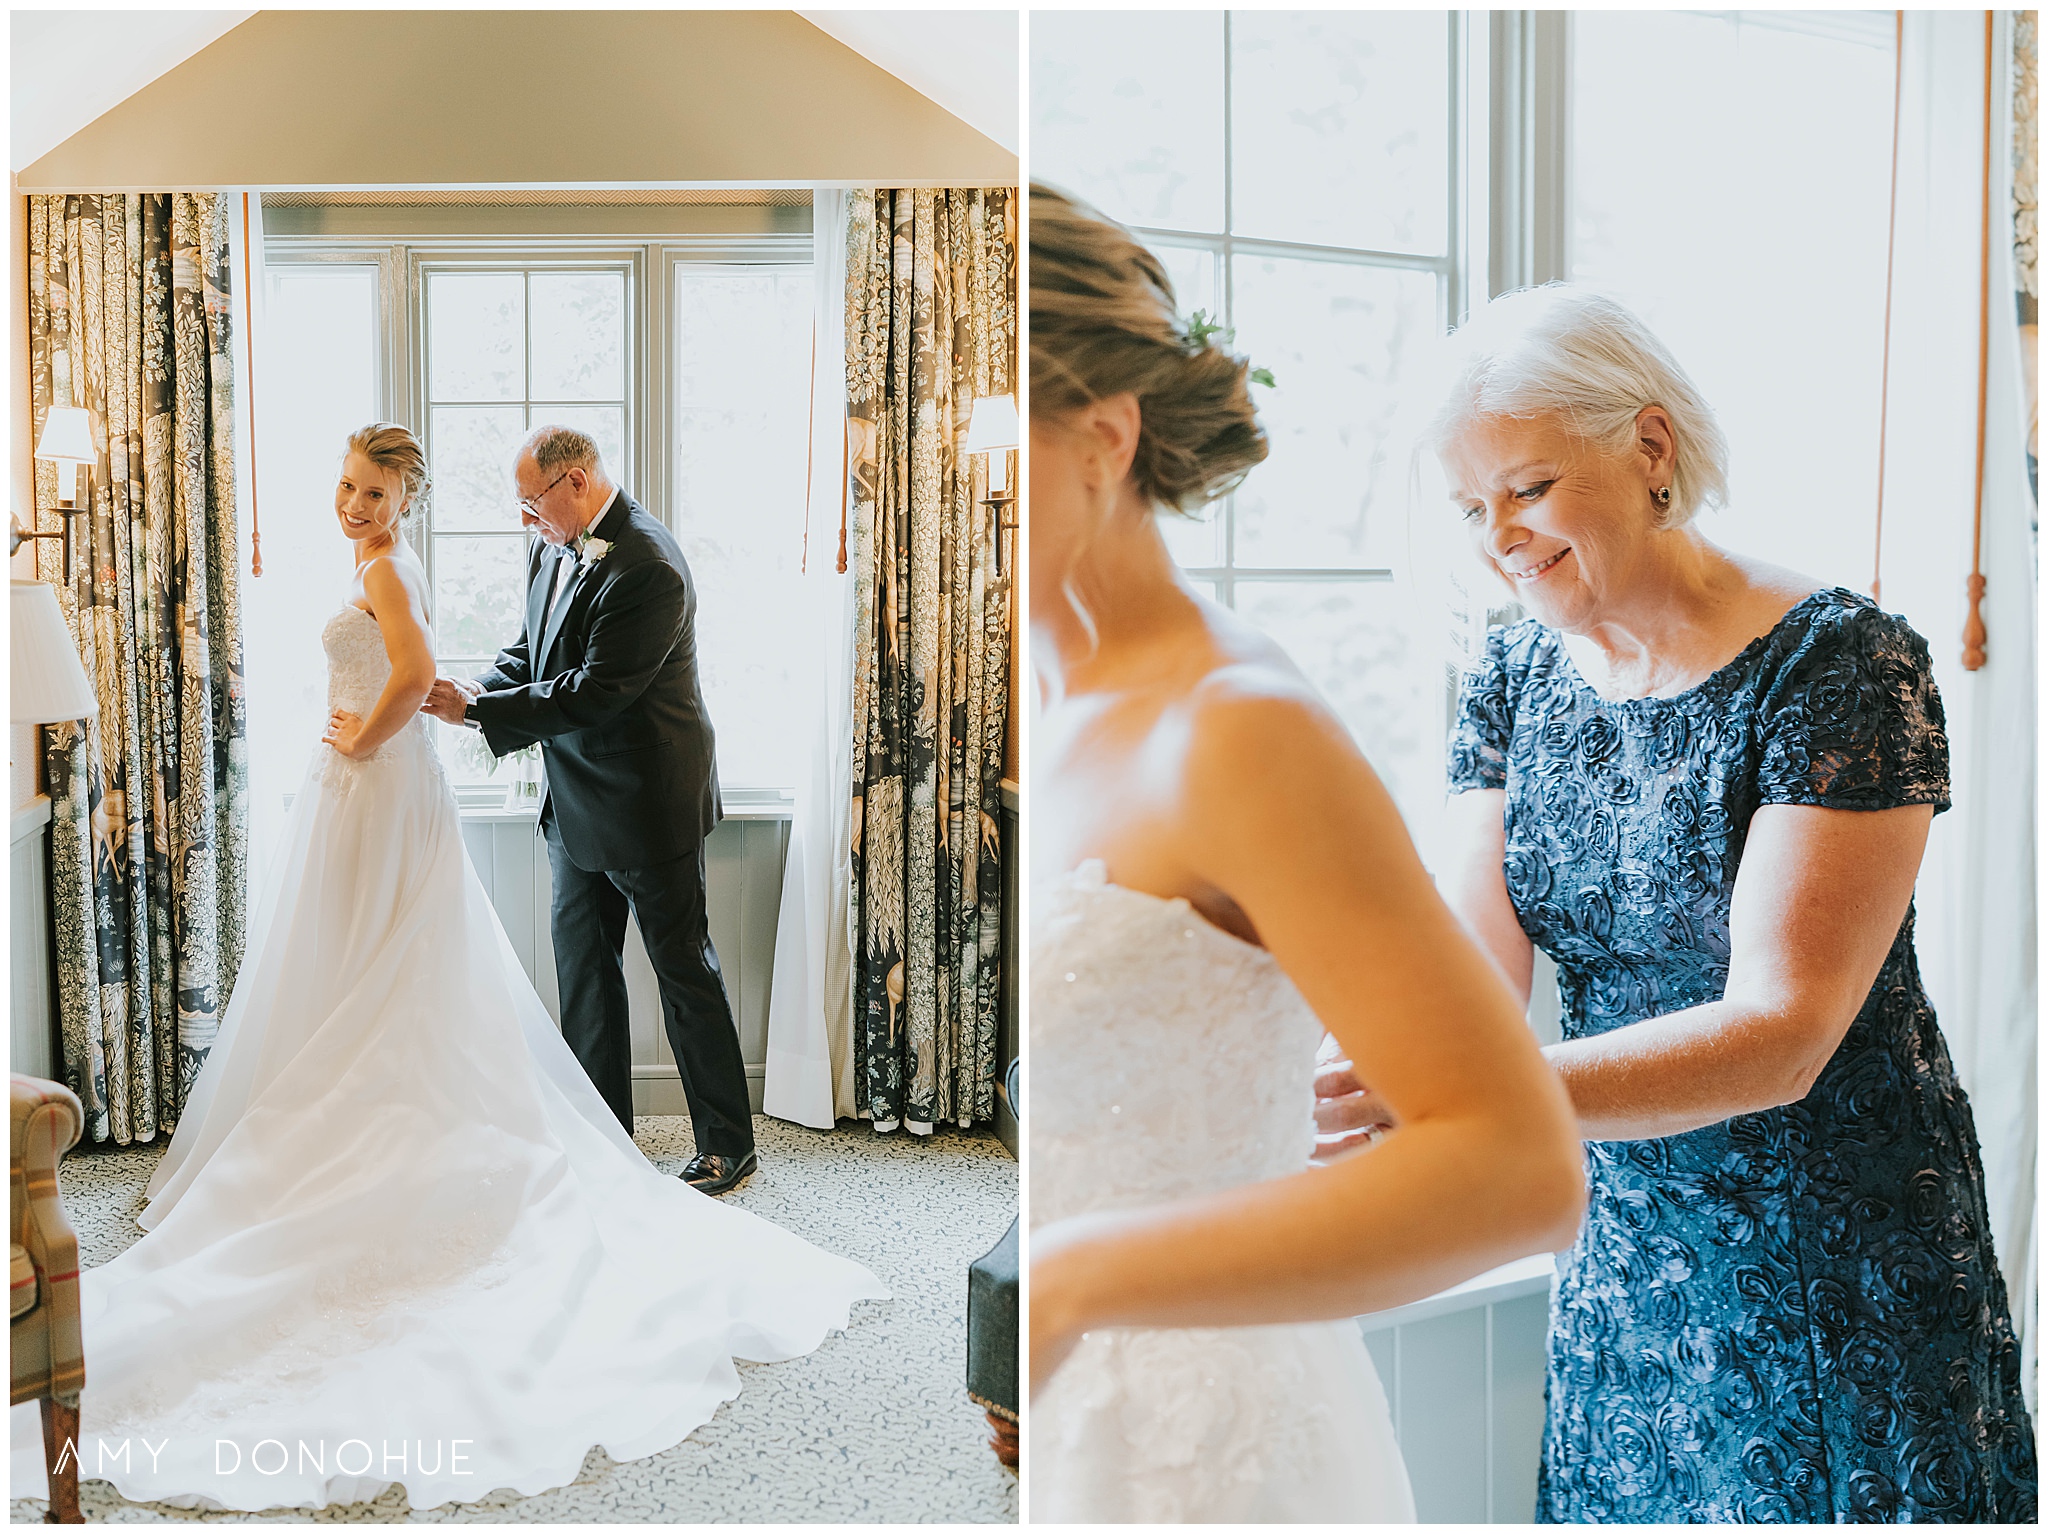 Mom and Dad helping button the bride in her wedding dress at the Woodstock Inn & Resort | Vermont Wedding Photographer | © Amy Donohue Photography